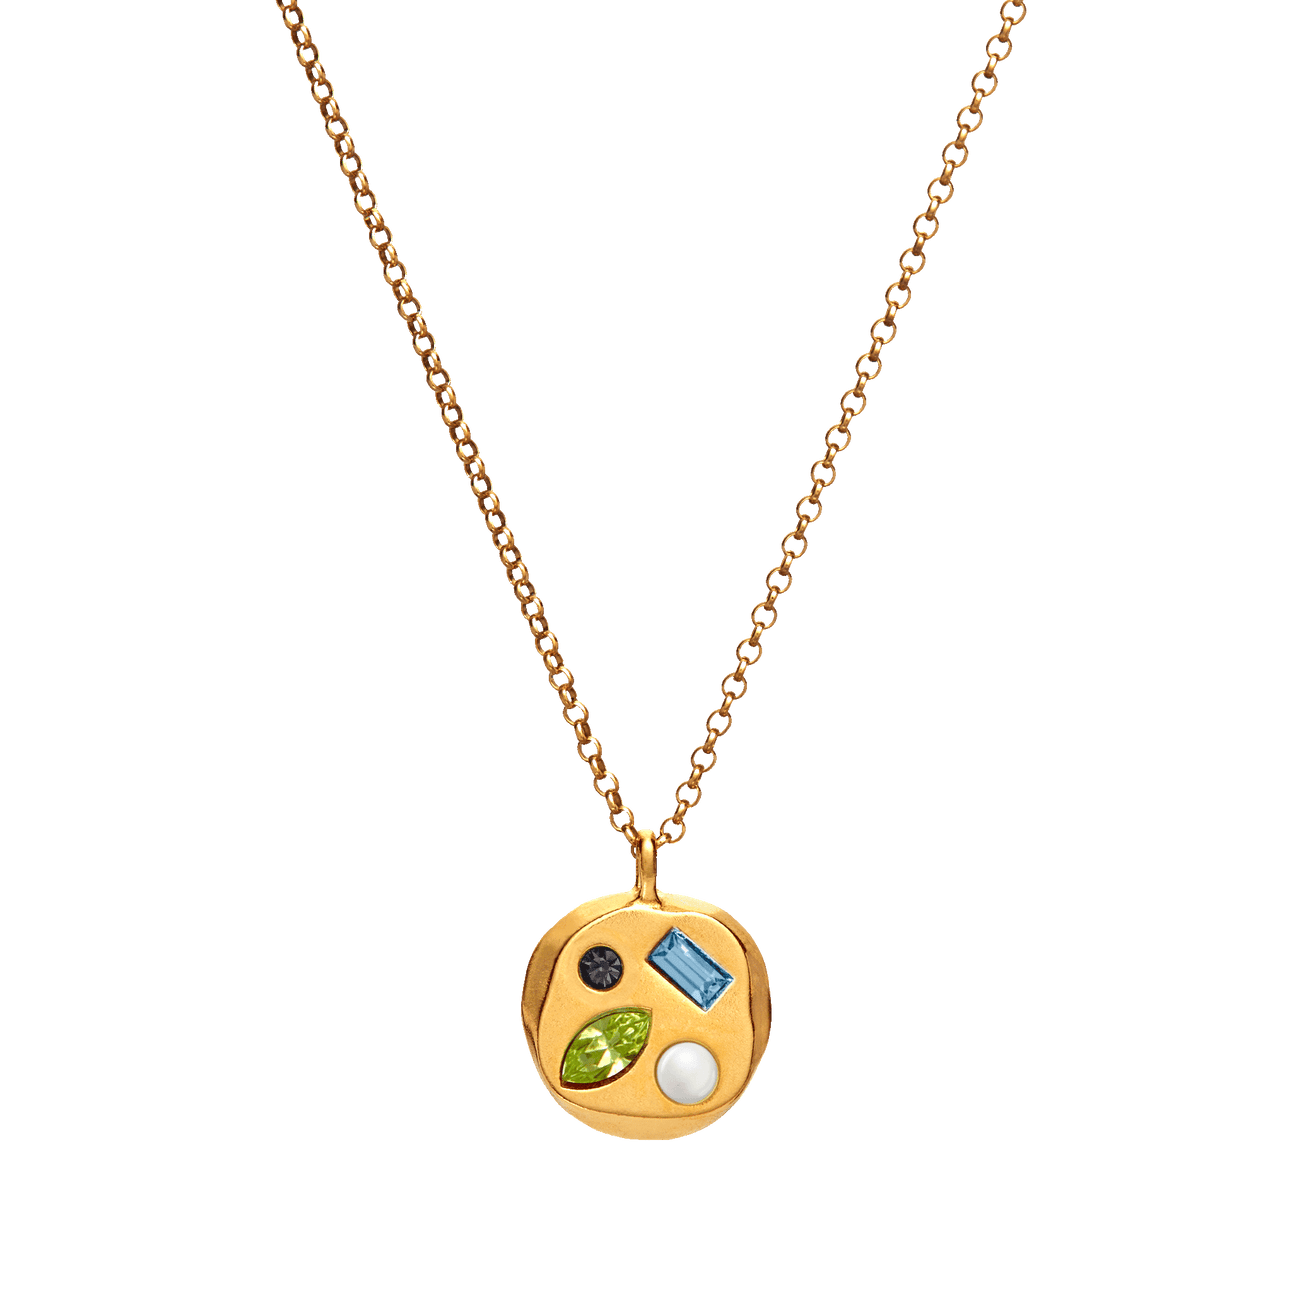 The August Fifteenth Pendant